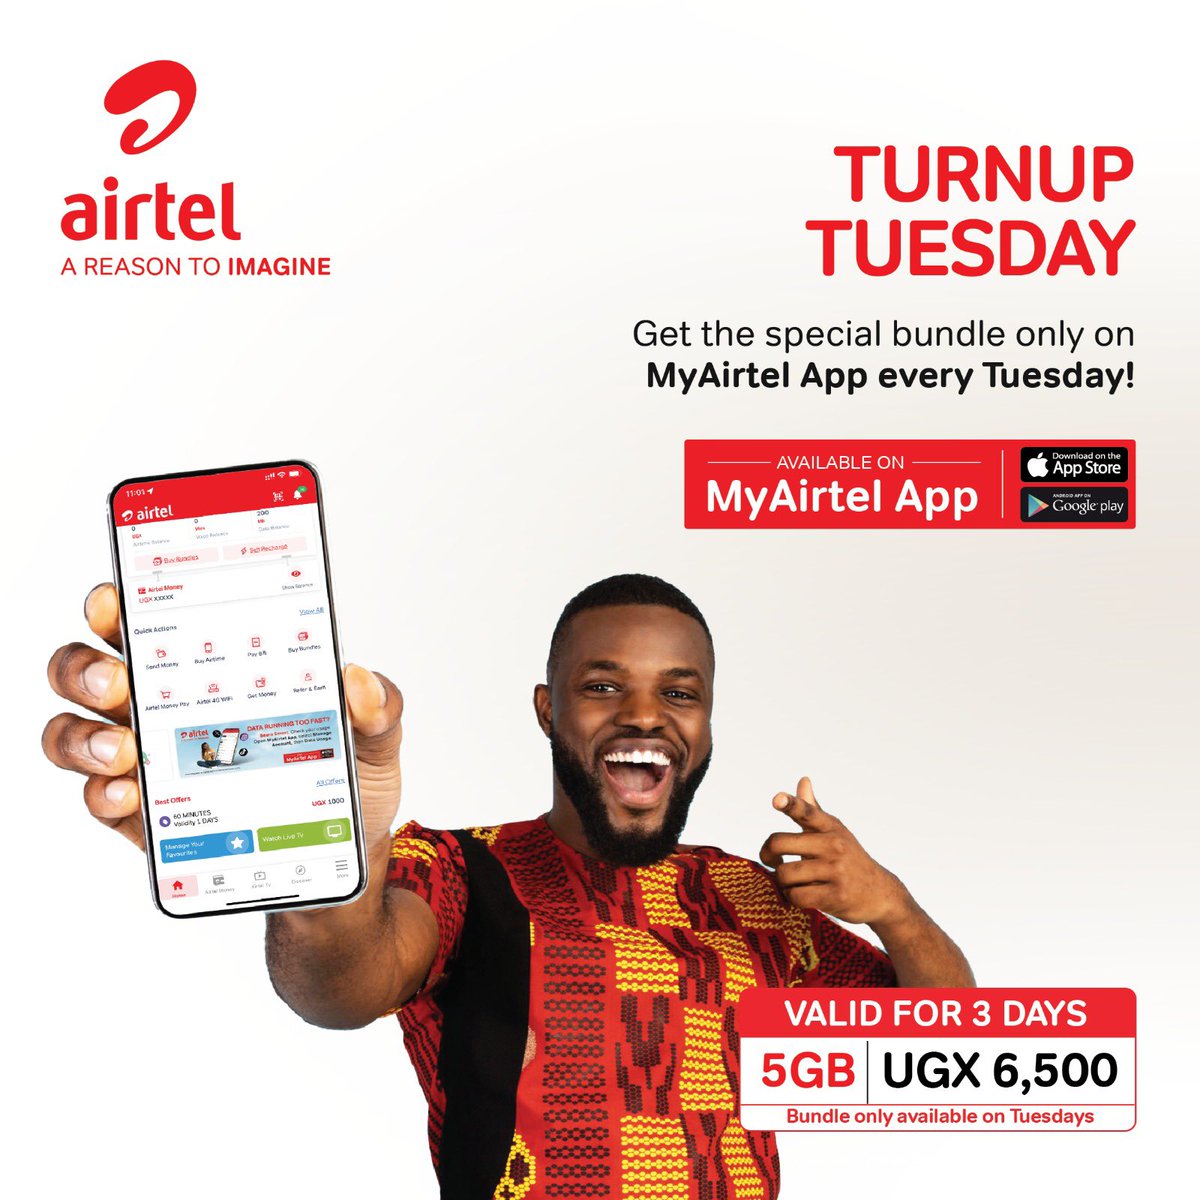 It's #TurnUpTuesday on #MyAirtelApp Embrace the joy of savings and entertainment with our special bundles, available on this link airtelafrica.onelink.me/cGyr/qgj4qeu2